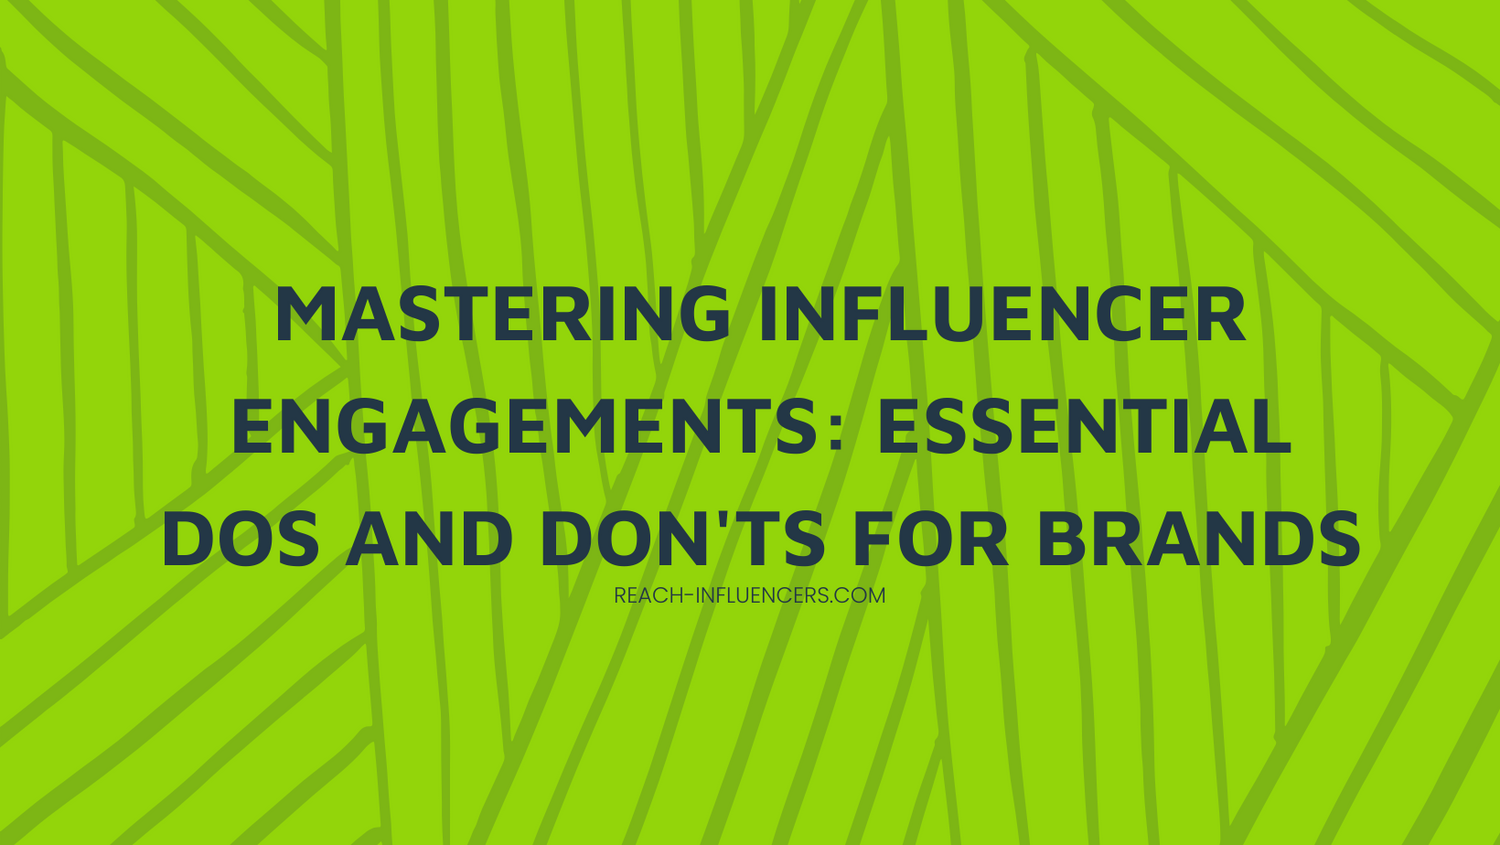 Discover influencer management excellence on our platform. Explore influencer marketing dos and don'ts in our blog for expert insights, real-world examples, and tips. Optimize your campaigns and build authentic connections for impactful brand partnerships.